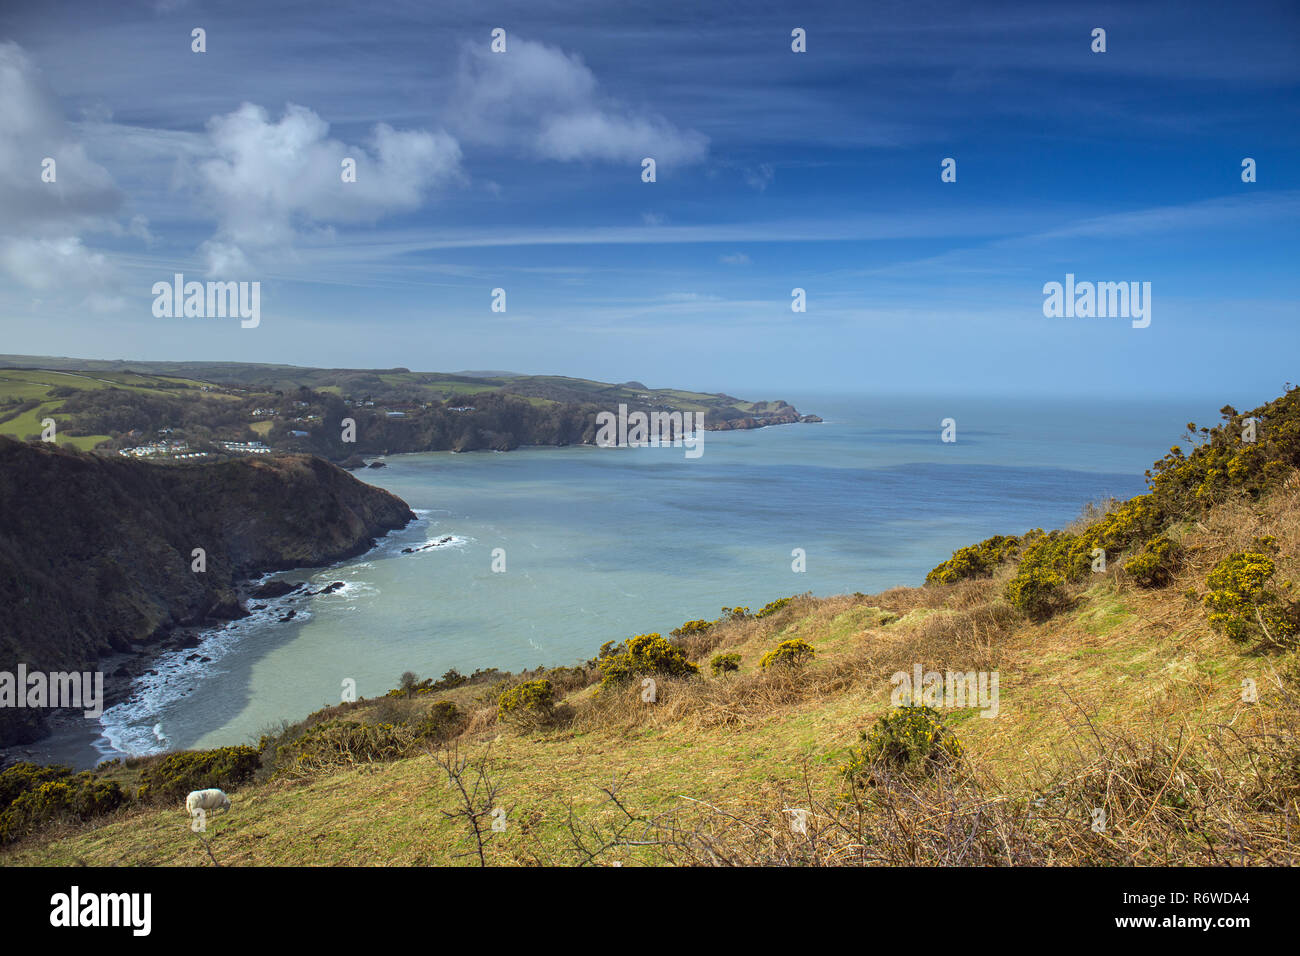 The beautiful and rugged Exmoor Hills on the North Devon coast of England. Stock Photo